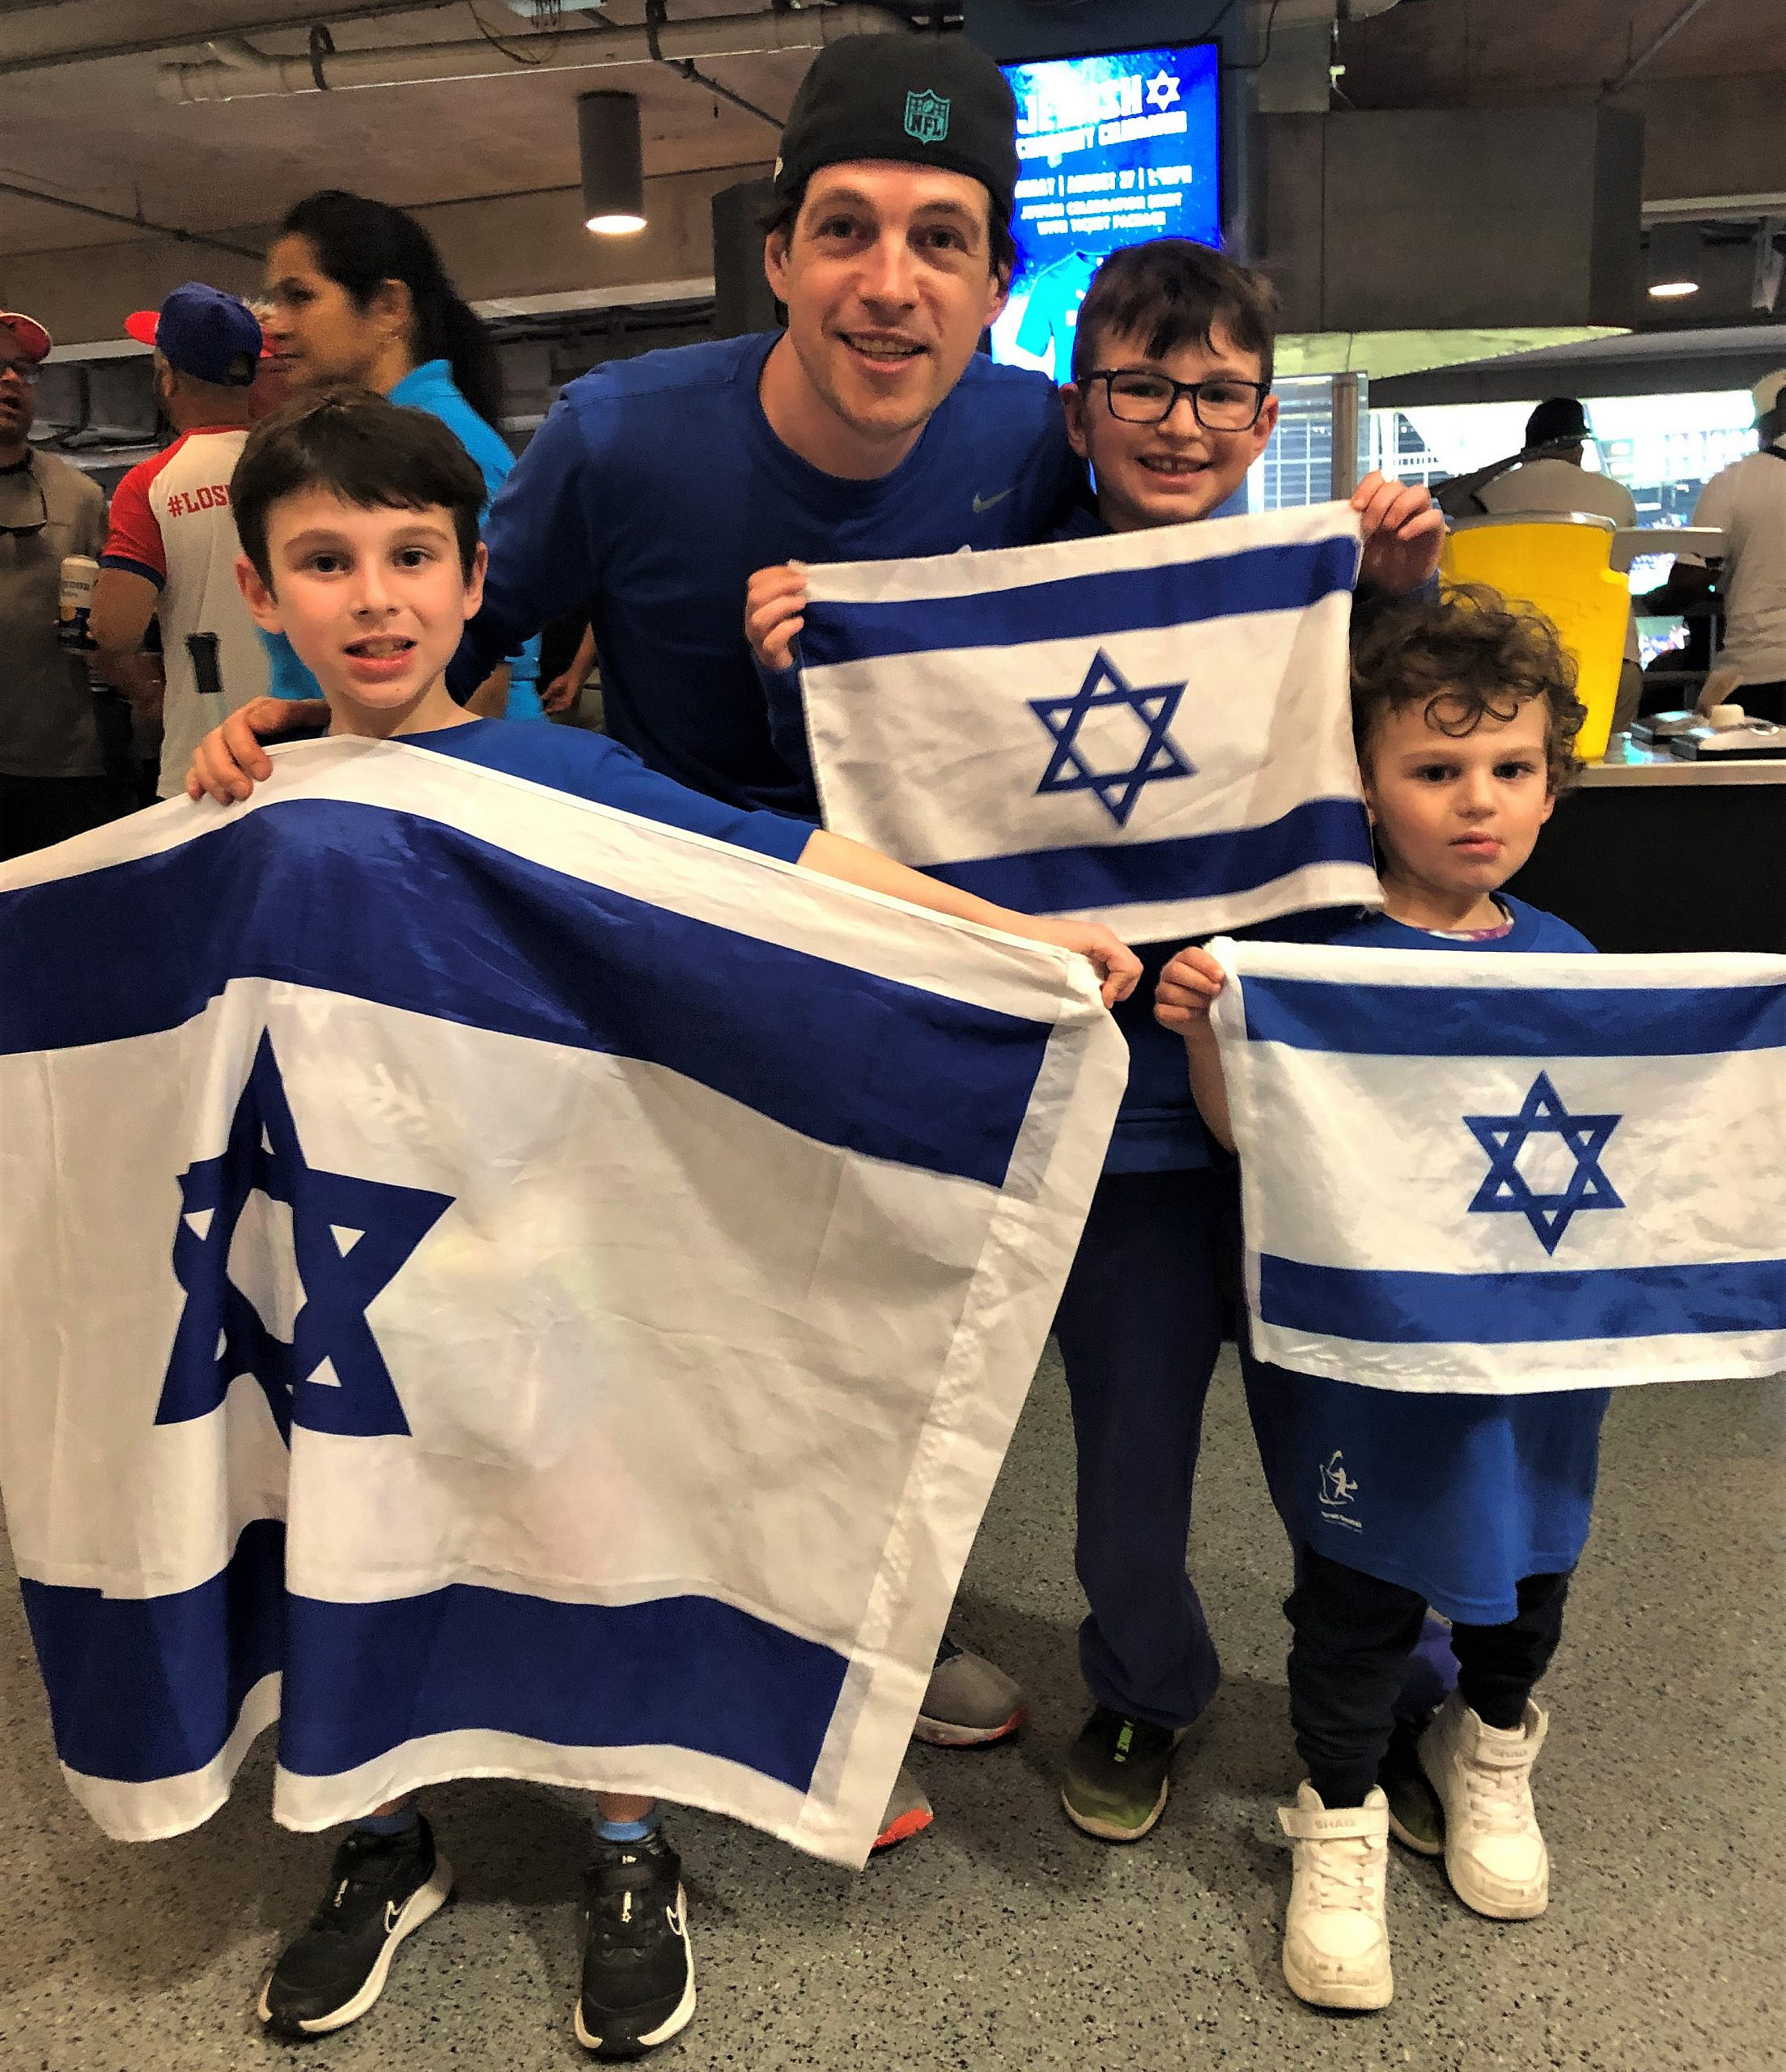 Team Israel baseball gear a home run with kvelling American Jewish fans